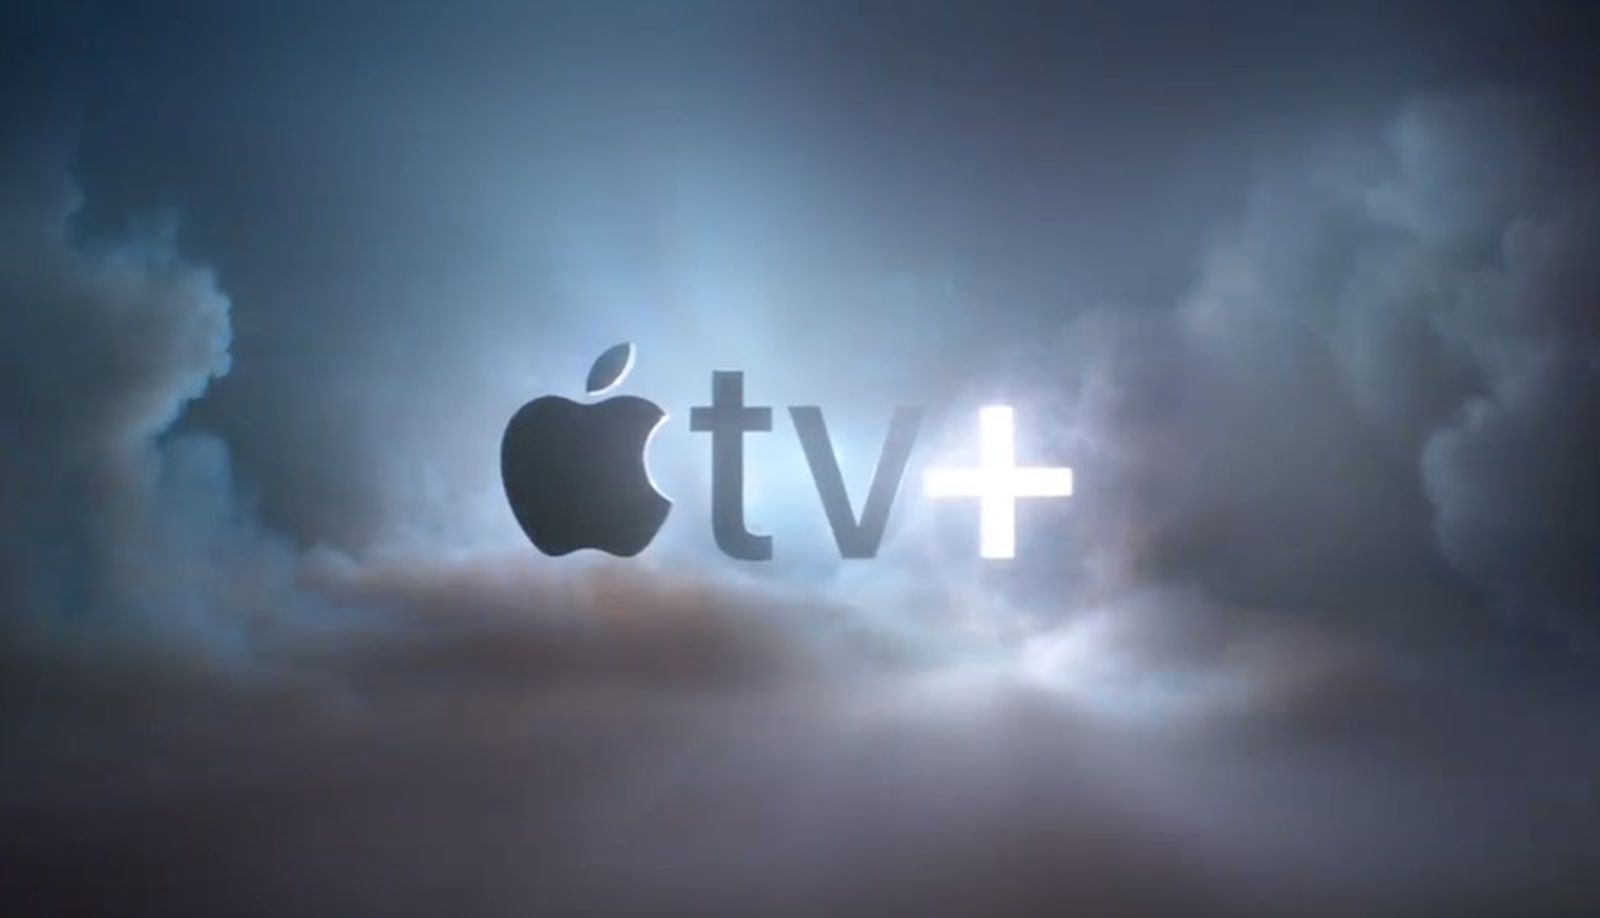 Prime Video arrives on Apple TV in over 100 countries - Apple